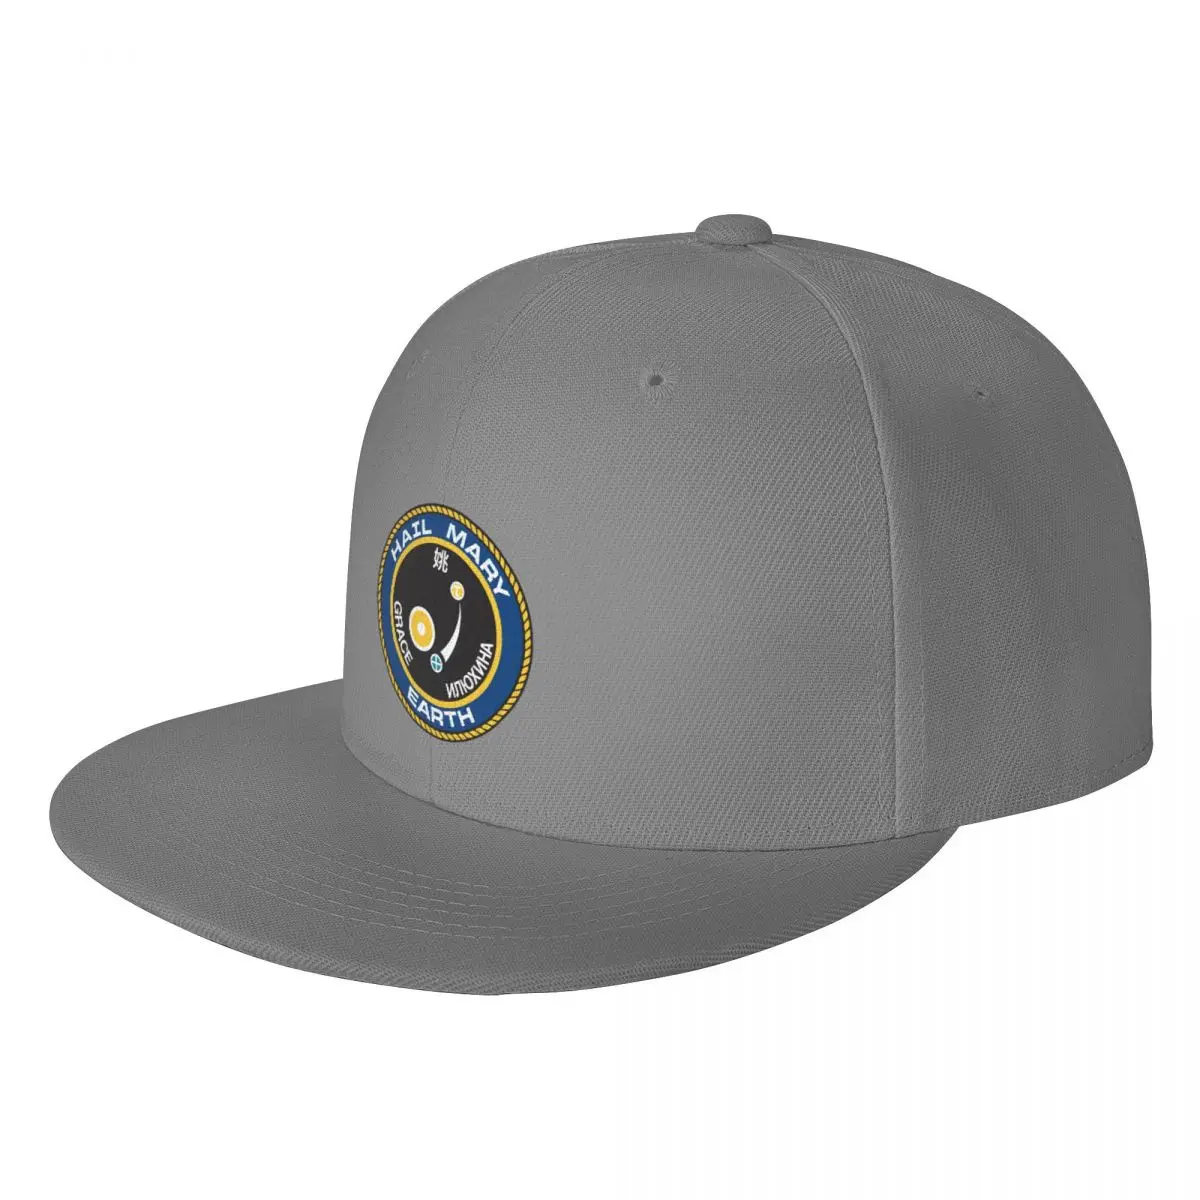 

Project Hail Mary Mission Patch Hip Hop Hat designer hat baseball caps hats for women Men's